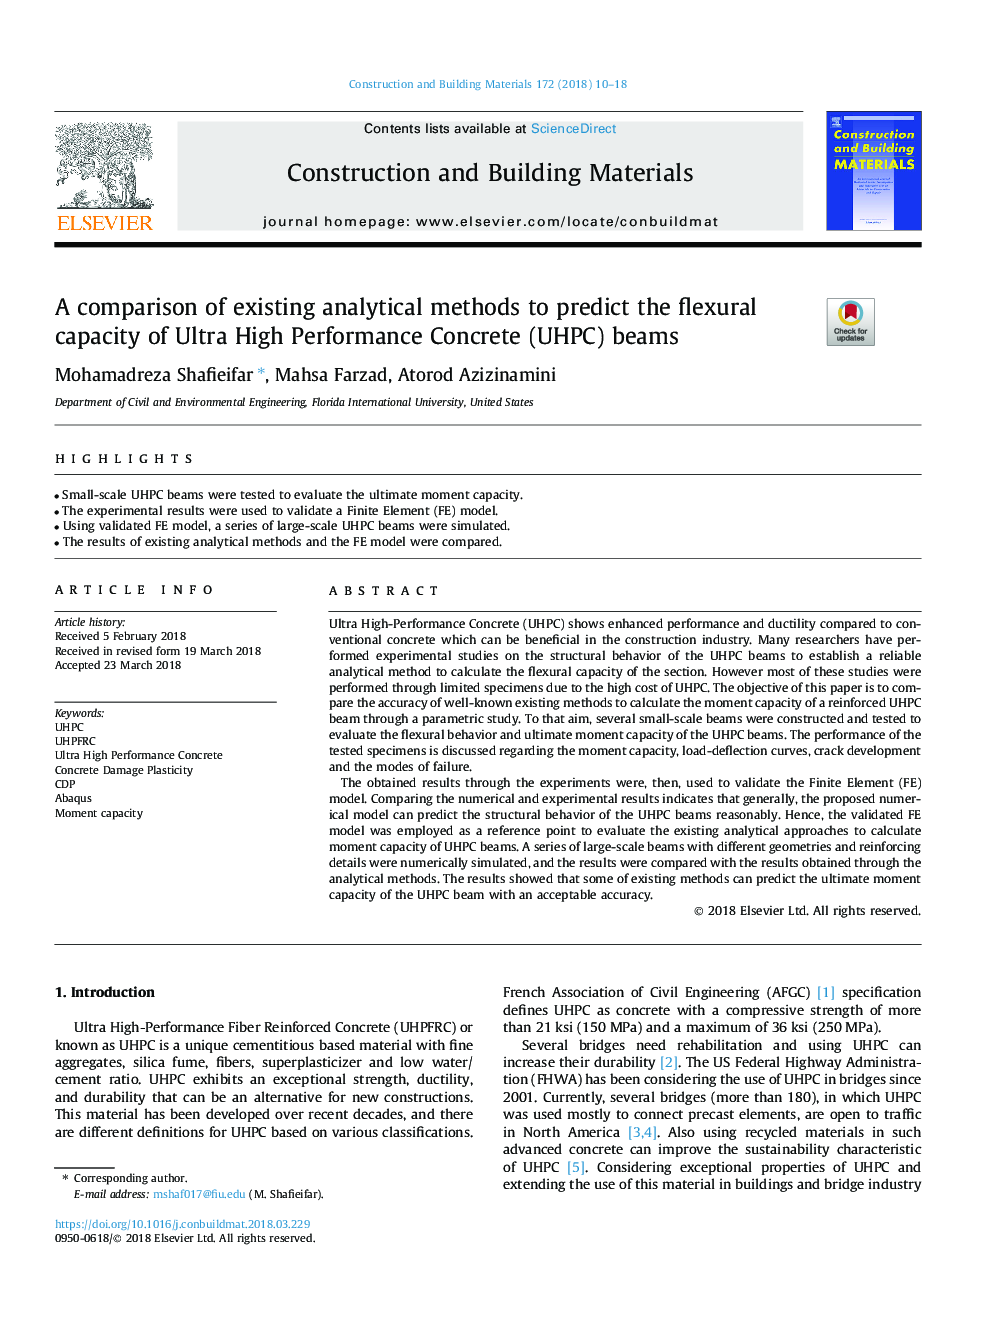 A comparison of existing analytical methods to predict the flexural capacity of Ultra High Performance Concrete (UHPC) beams